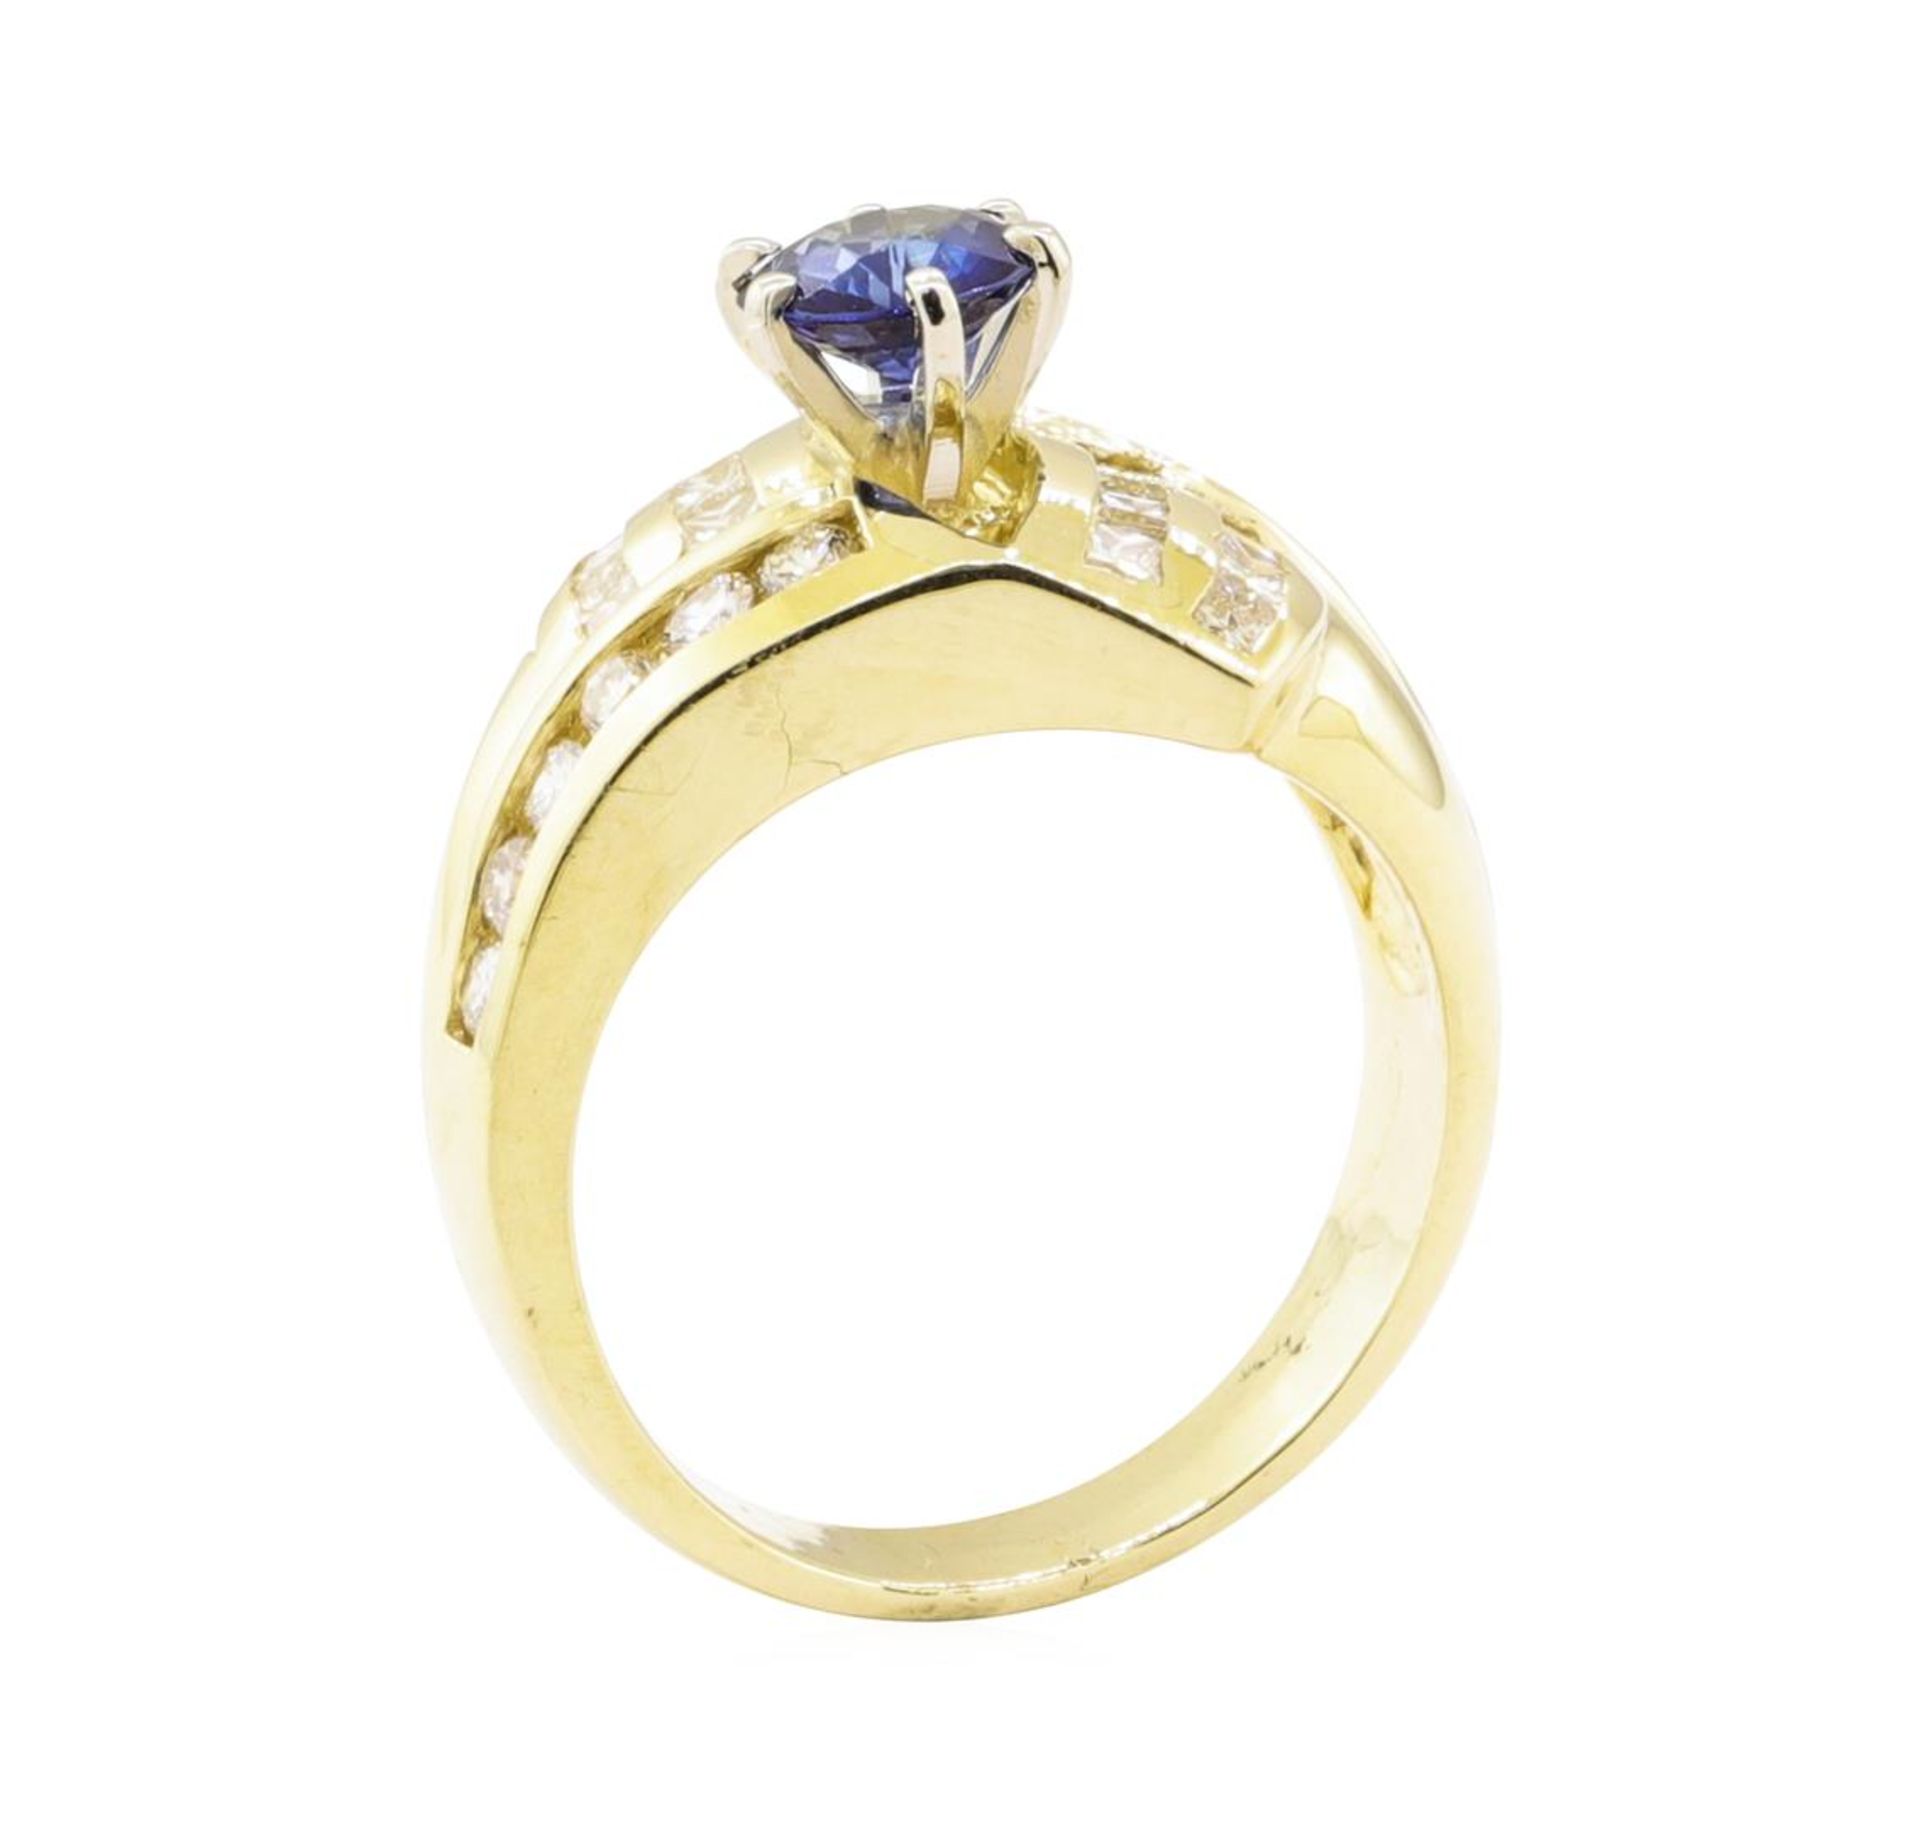 1.77 ctw Blue Sapphire And Diamond Ring - 14KT Yellow Gold - Image 4 of 5